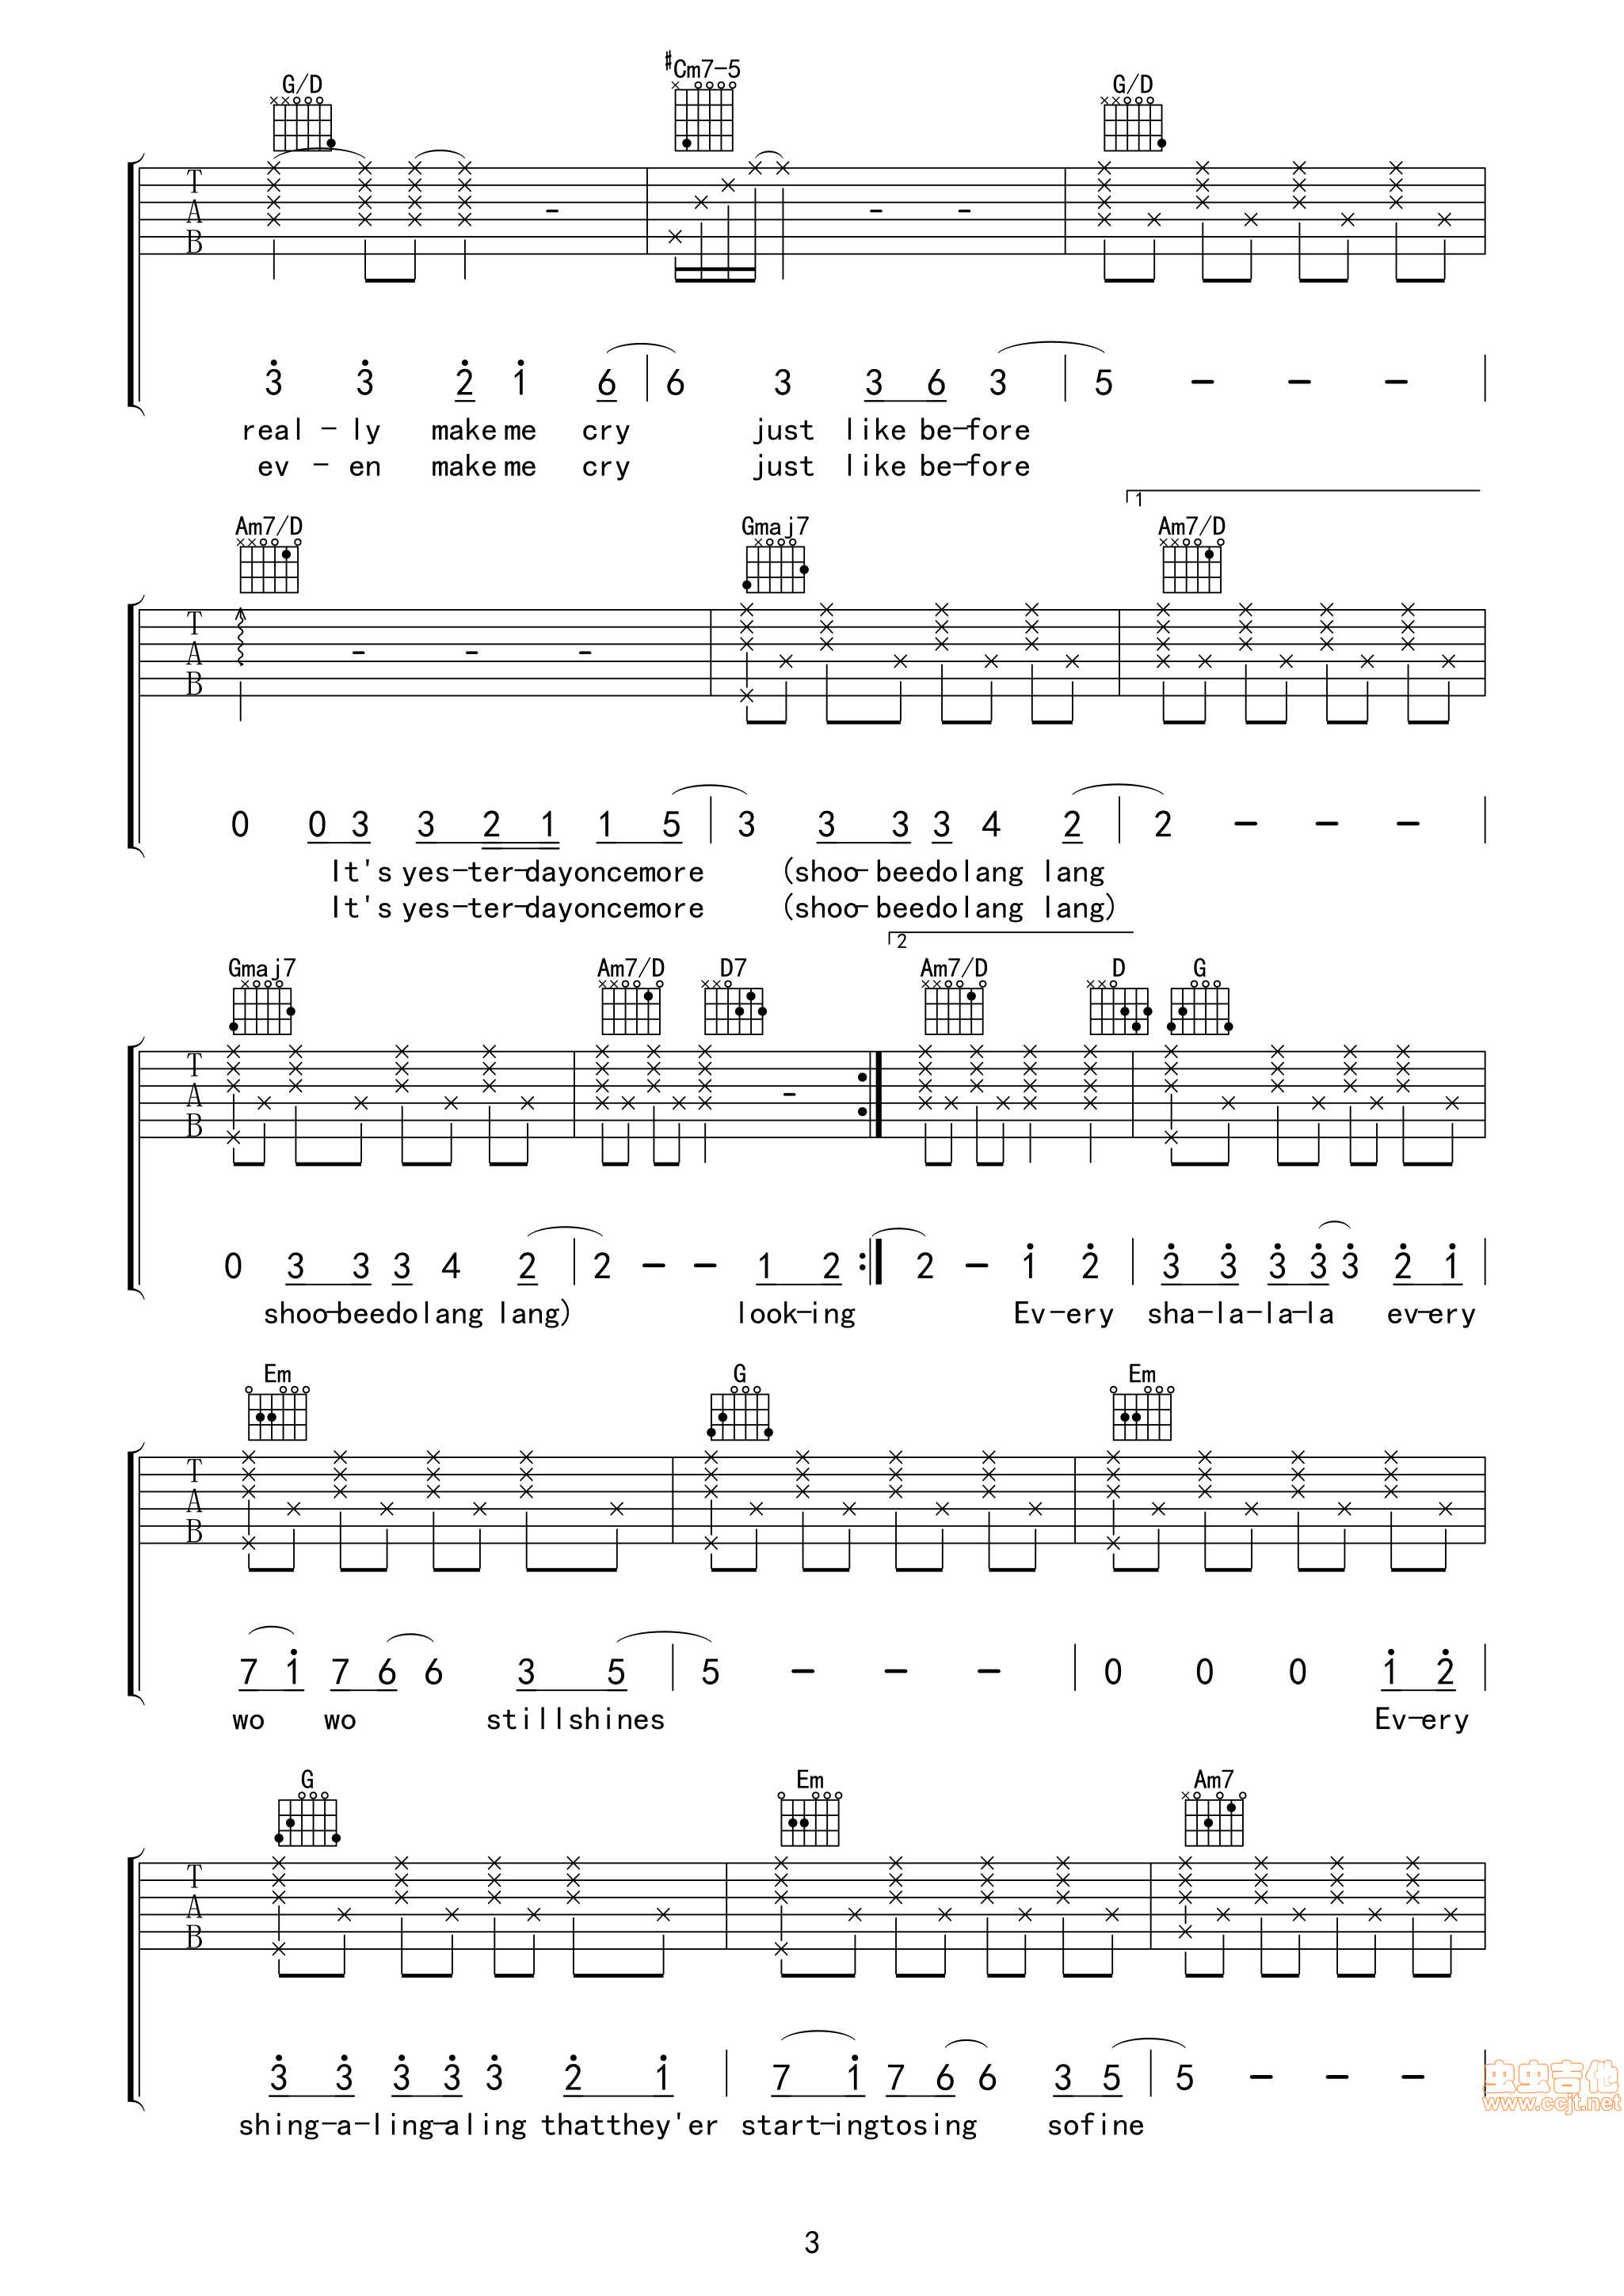 Yesterday Once More by The Carpenters Guitar Tabs Chords Solo Notes Sheet Music Free